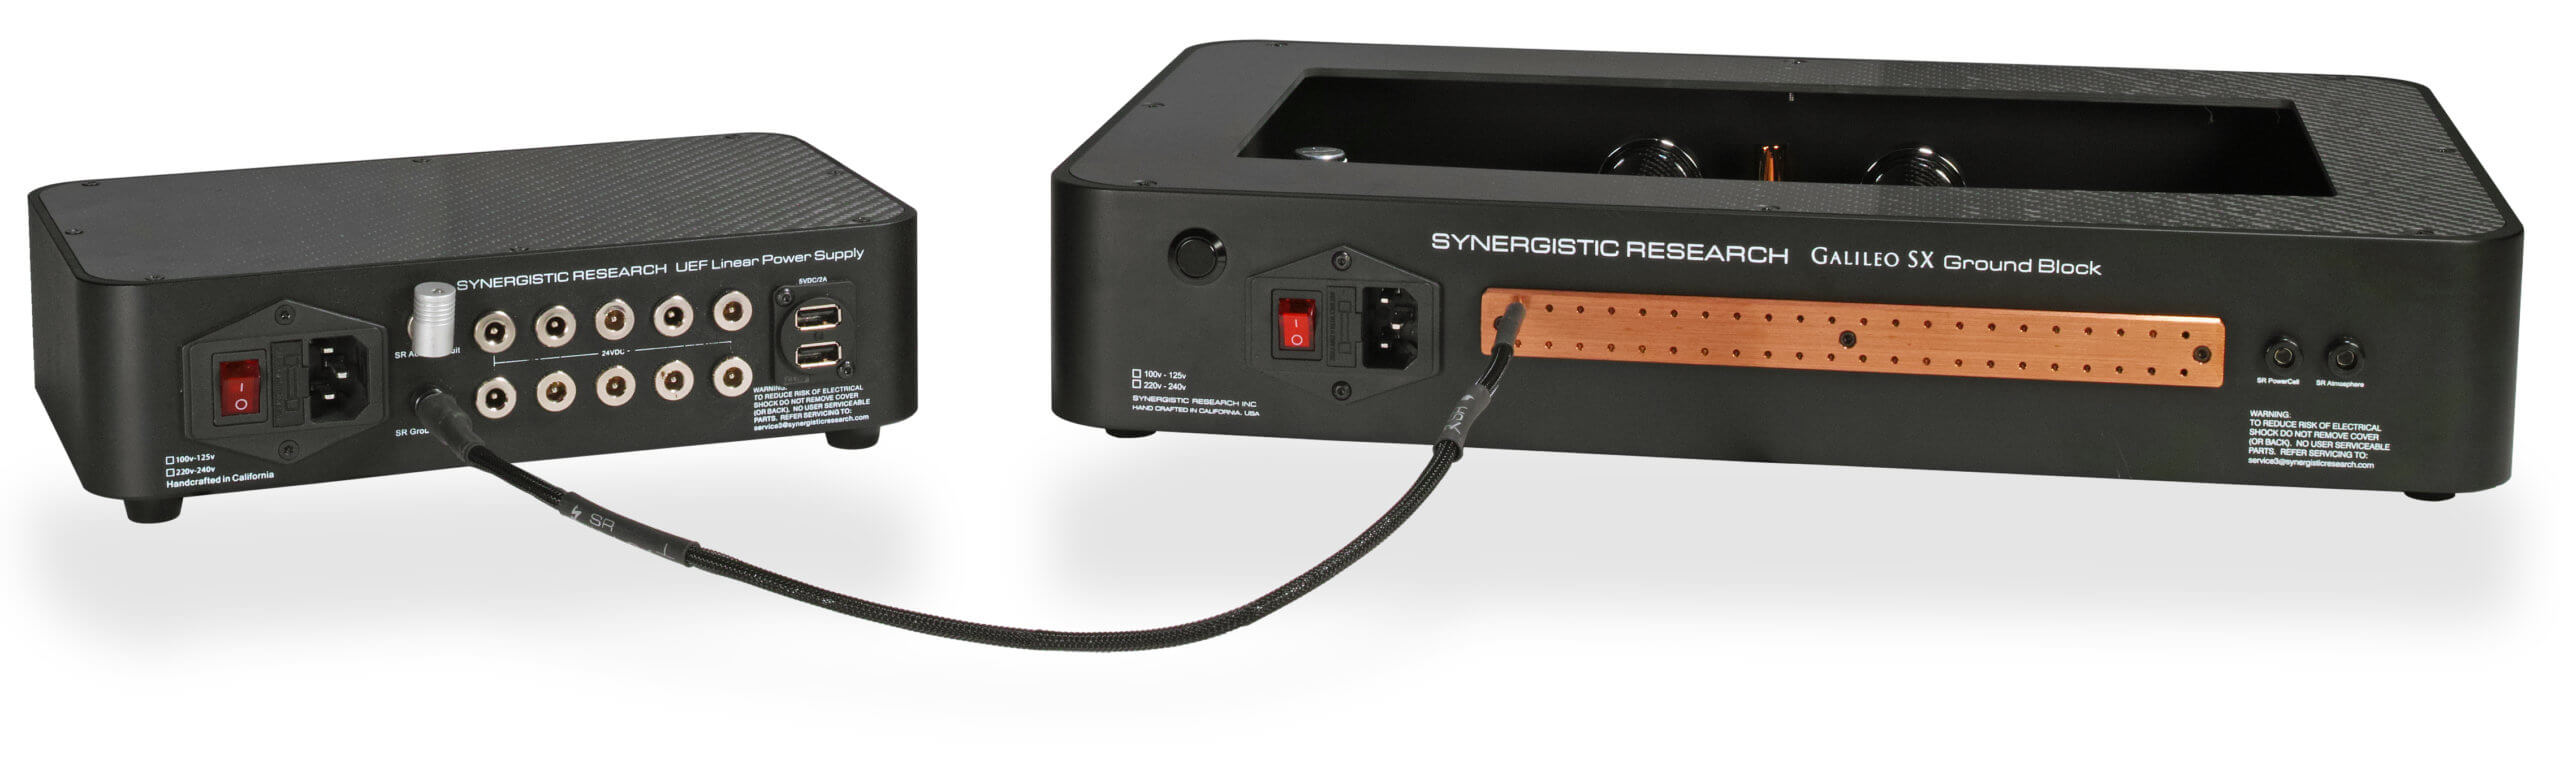 Synergistic Research Tranquility Linear Power Supply UEF